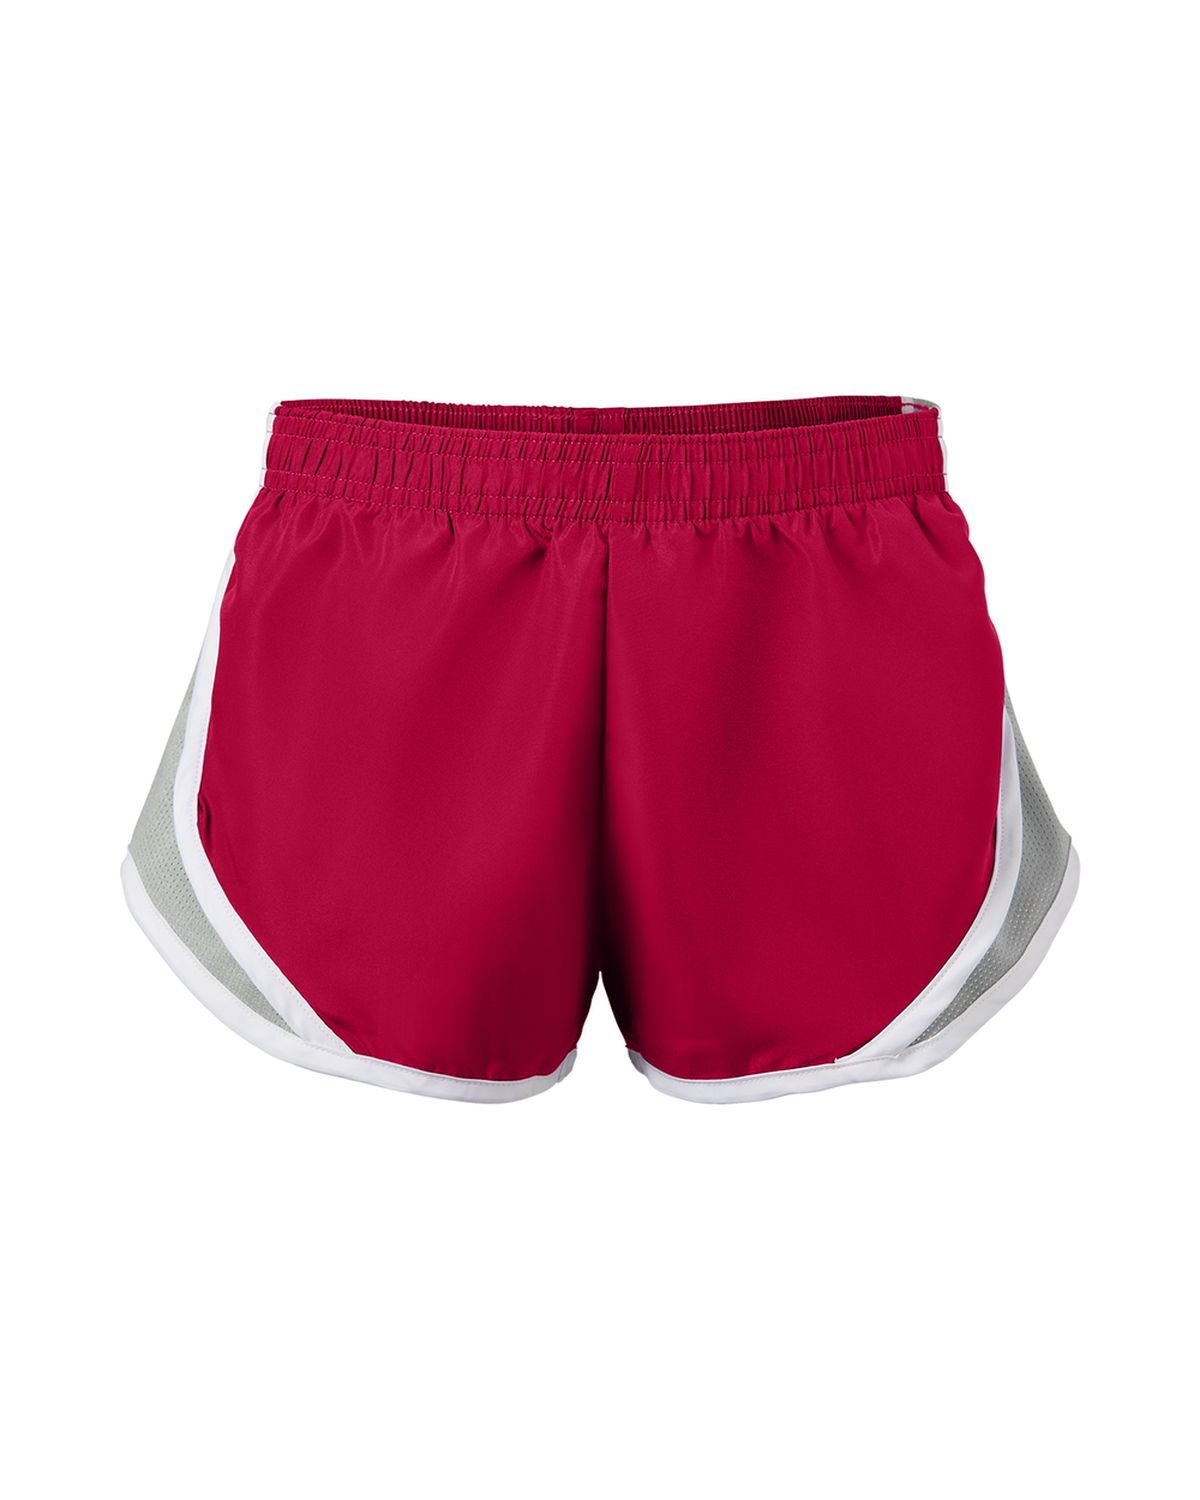 Soffe Shorts - Custom Soffe Shorts for Your Group